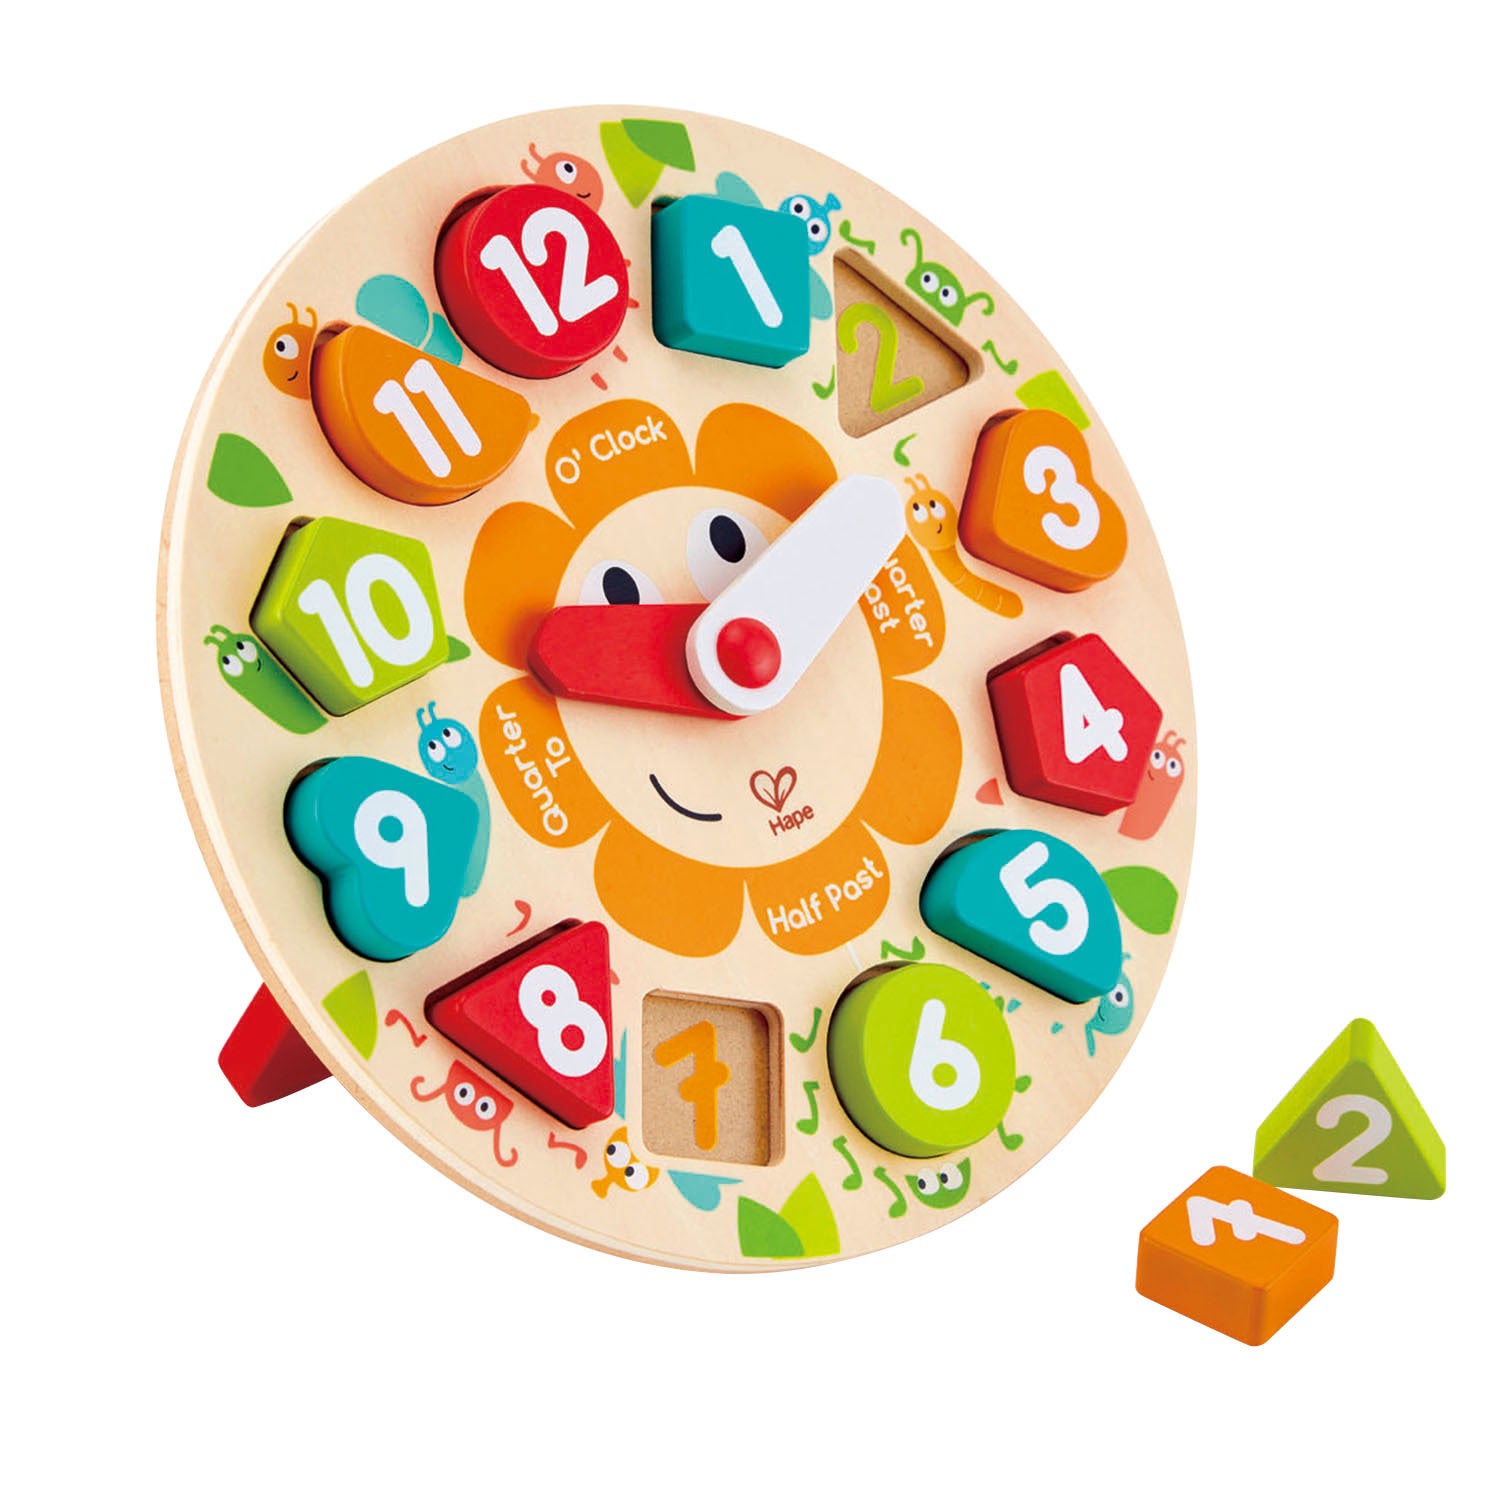 13pc Hape 23cm Chunky Clock Puzzle Educational/Activity Wooden Toy/Play Kids 3y+